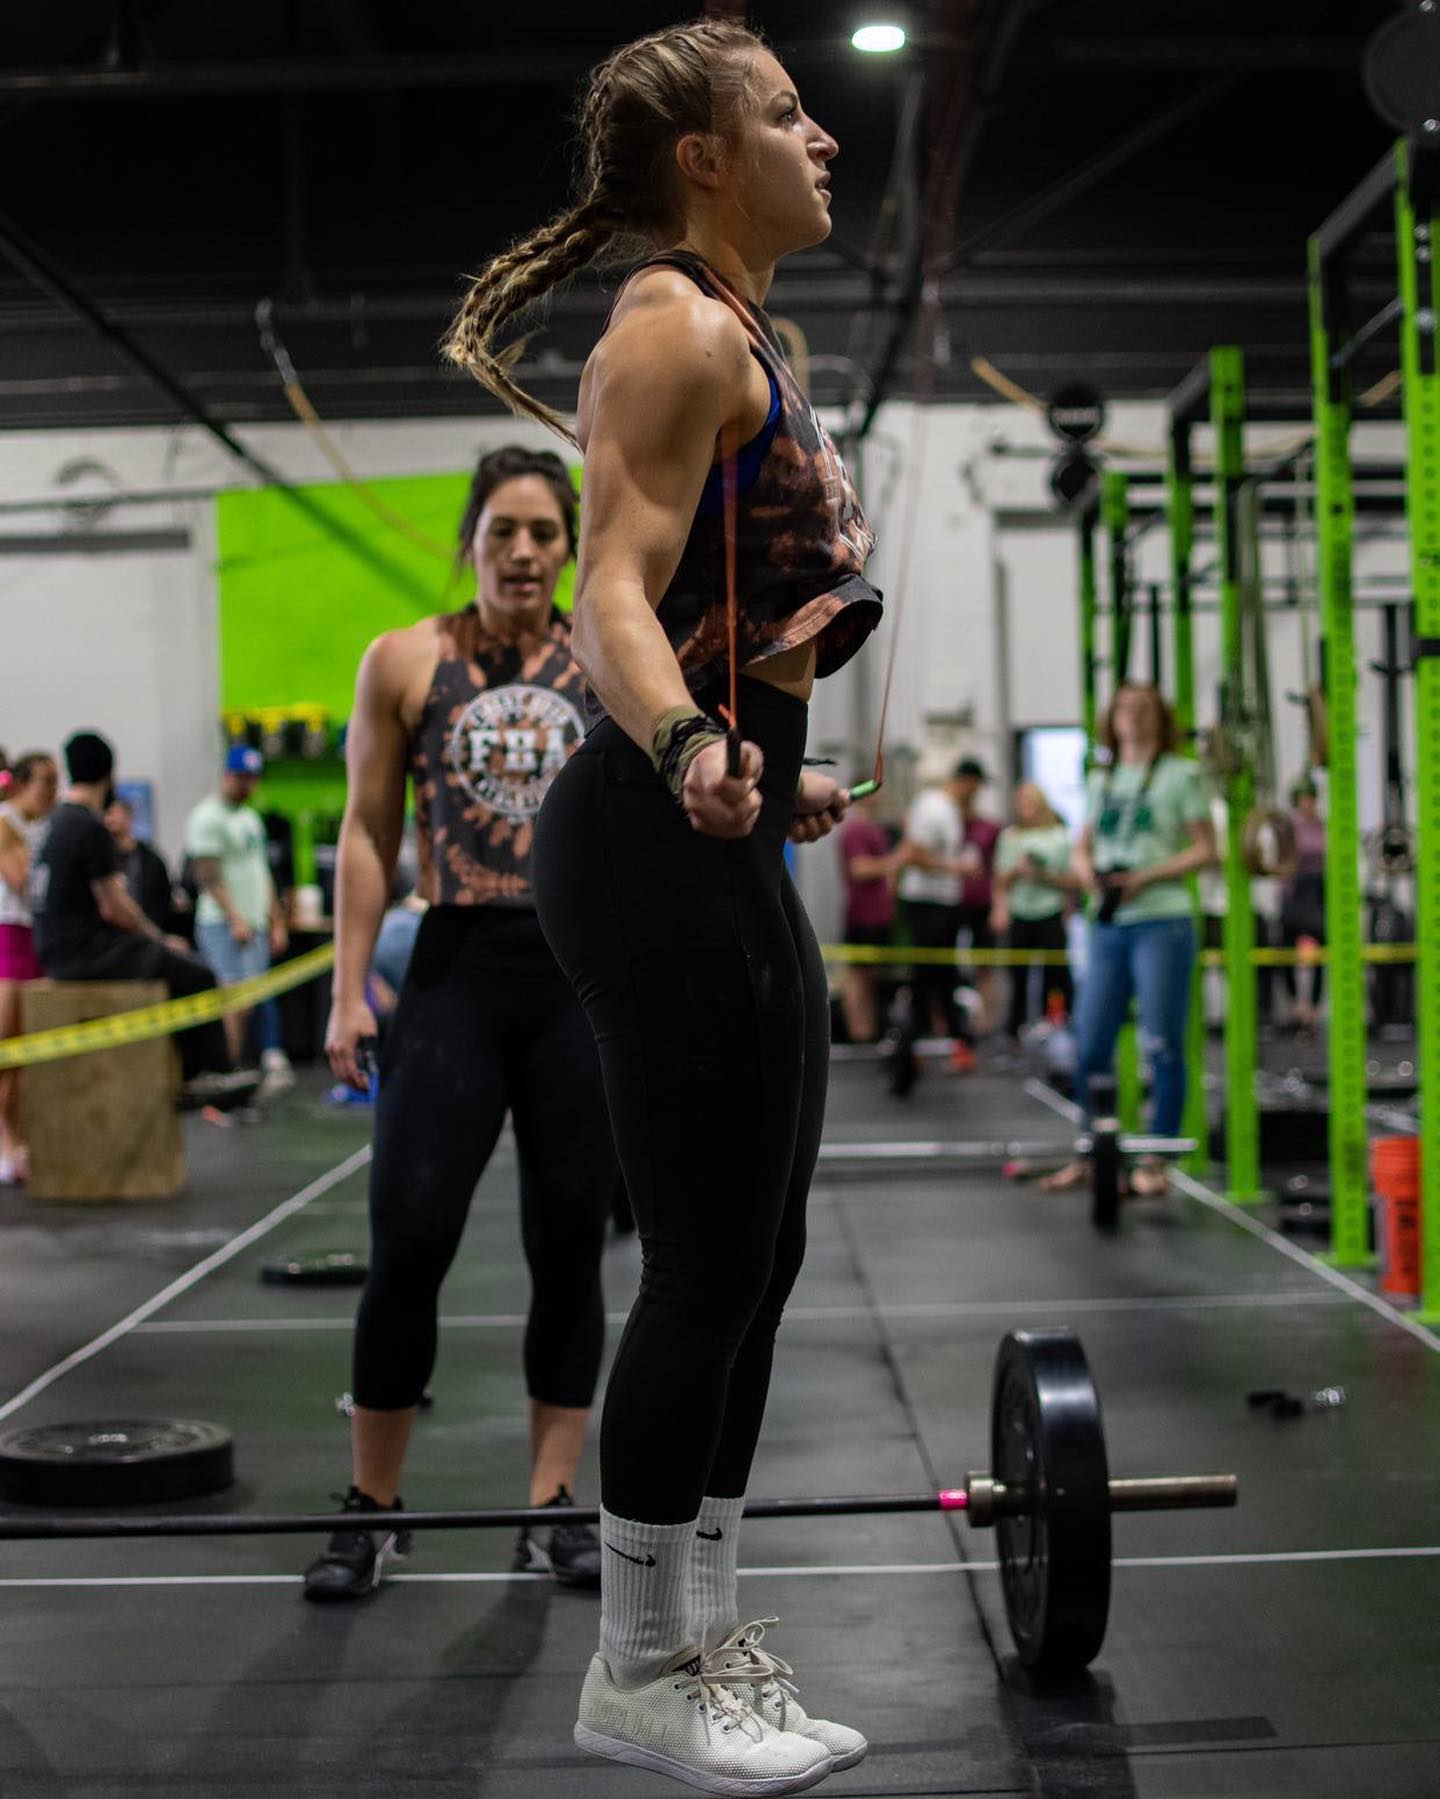 Crossfitters.. Team events or individual, which do you prefer? How about normal wods during the week??
** If you have any photos of you competing please submit em to us via DM!!